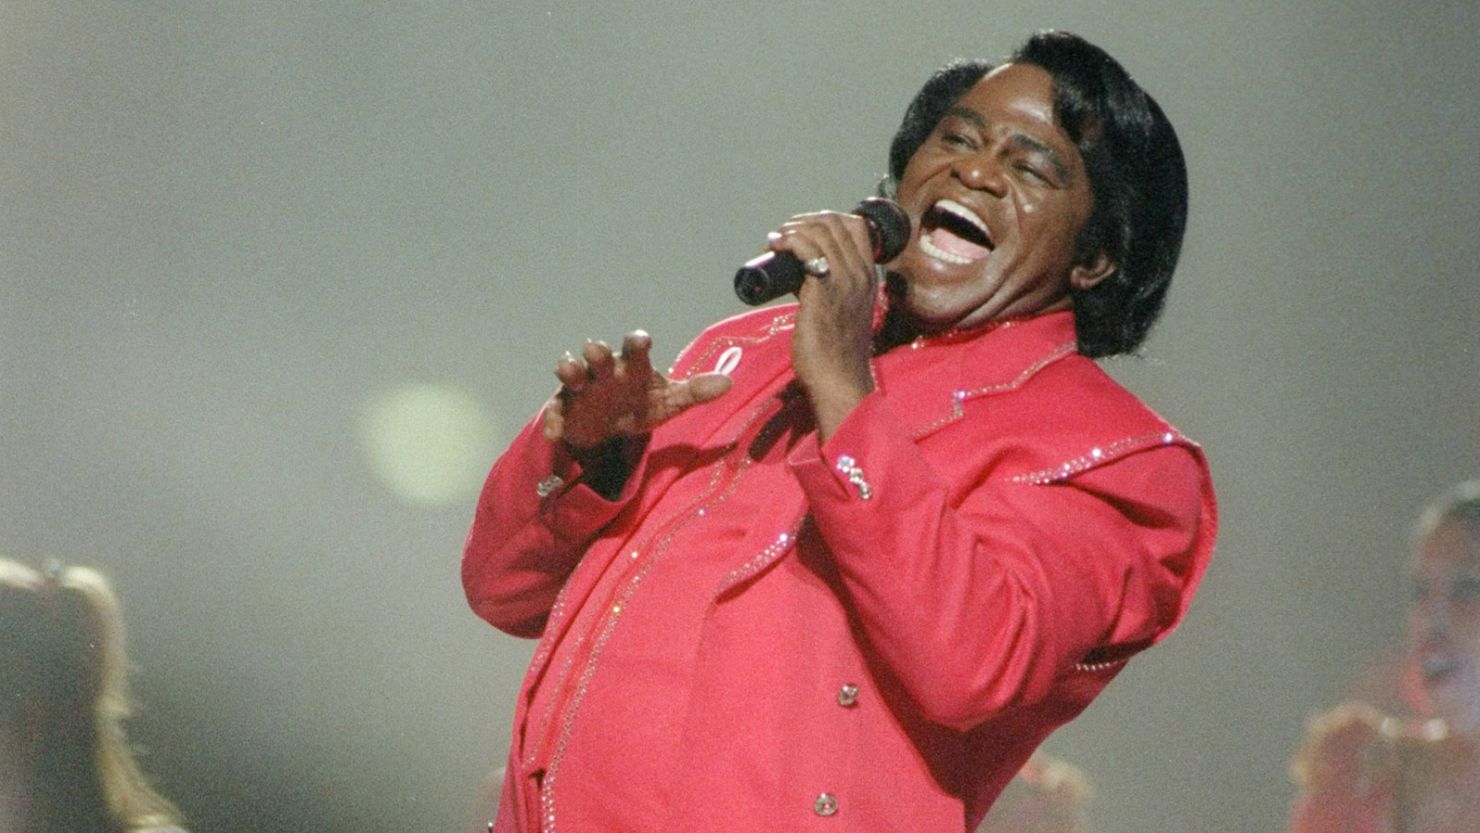 James Brown performs at the halftime show for Super Bowl XXXI on January 26, 1997, in New Orleans.